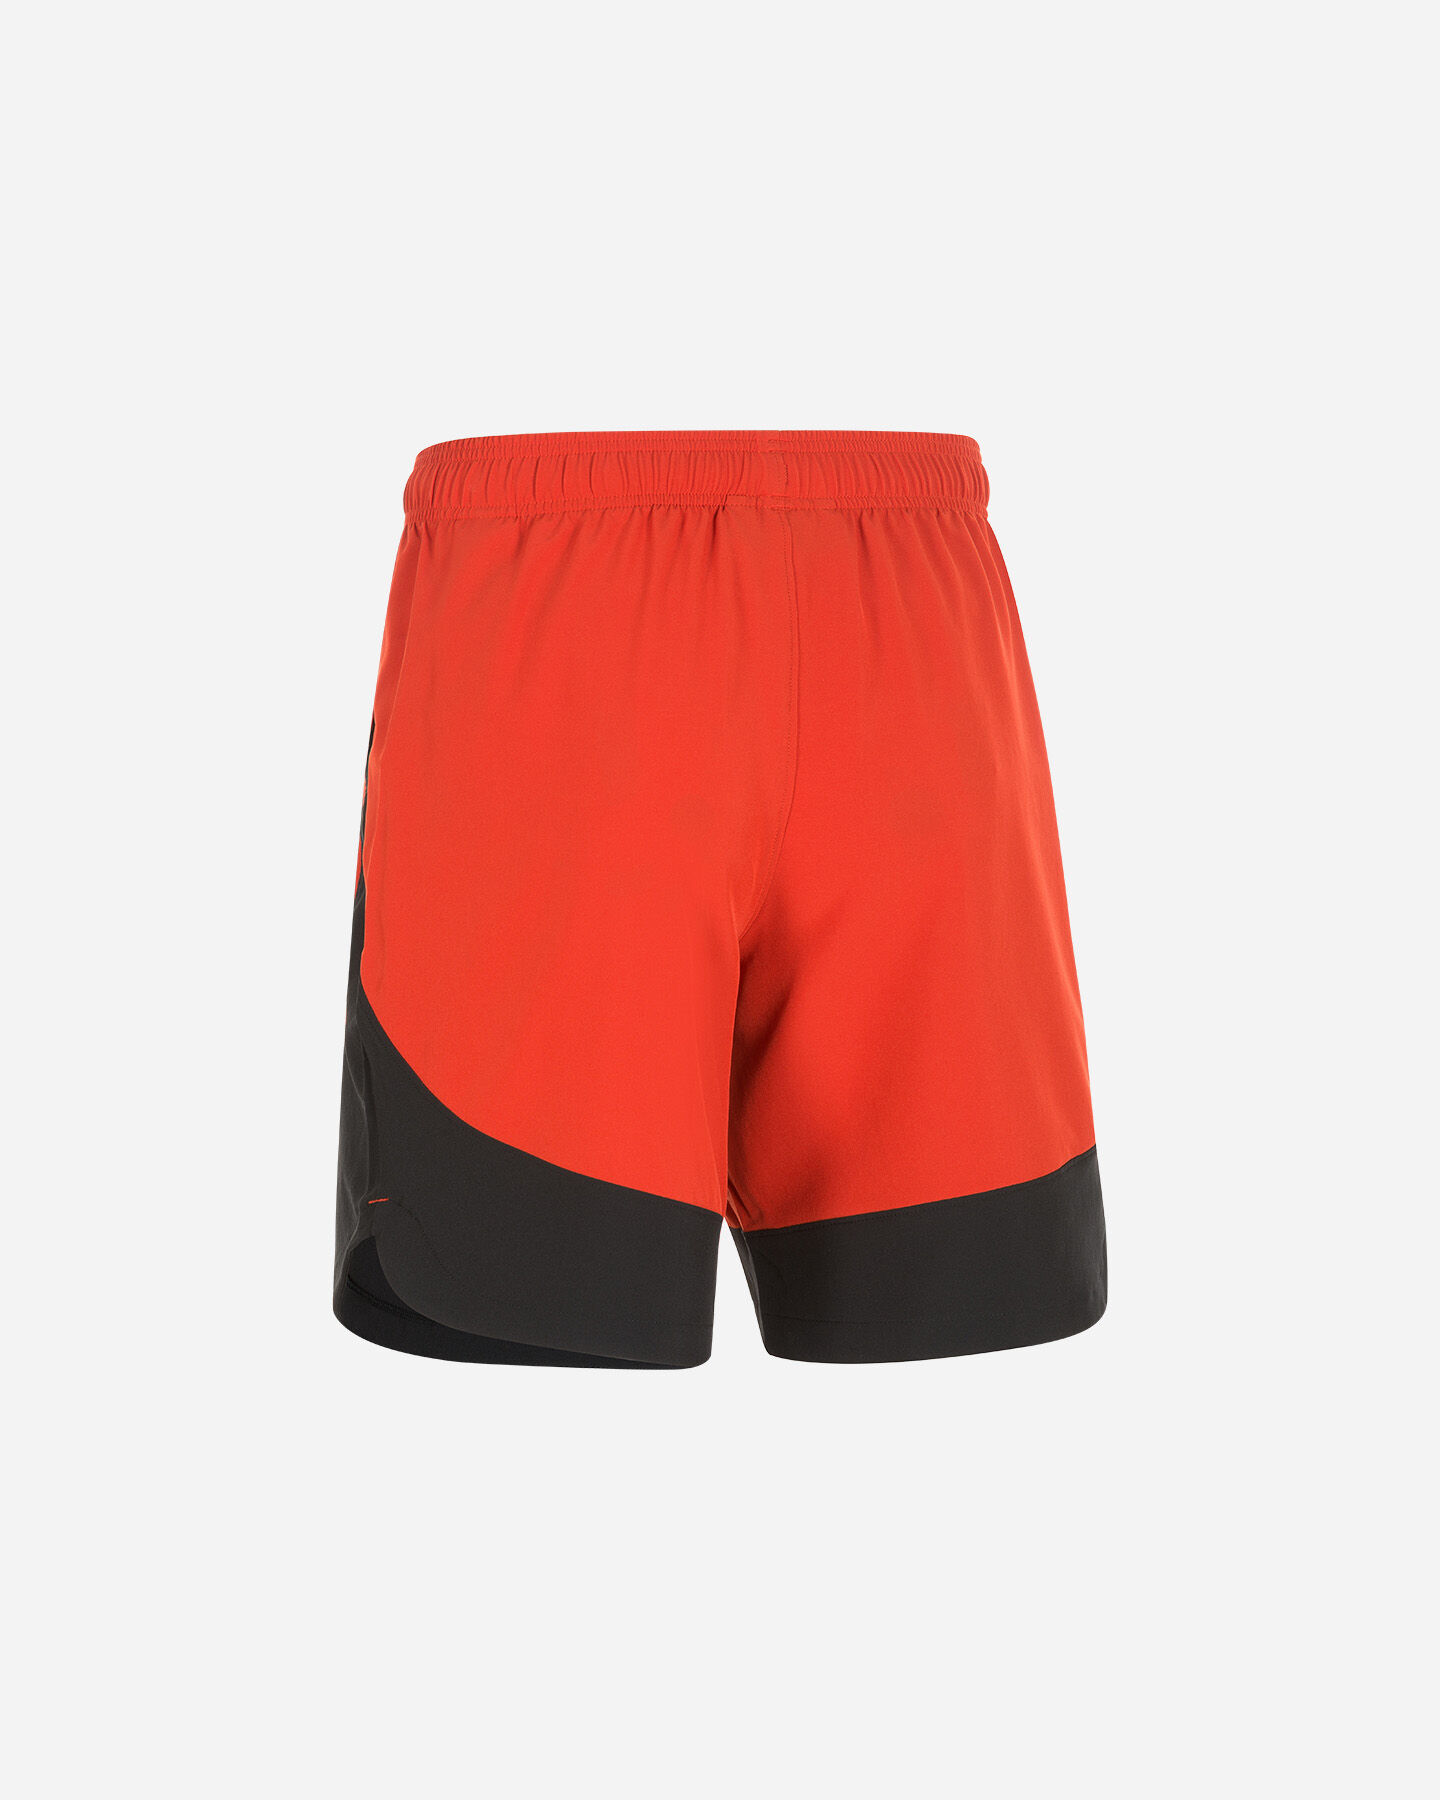  Pantalone training UNDER ARMOUR HIIT WOVEN COLOR BLOCK  M S5336530|0839|SM scatto 1